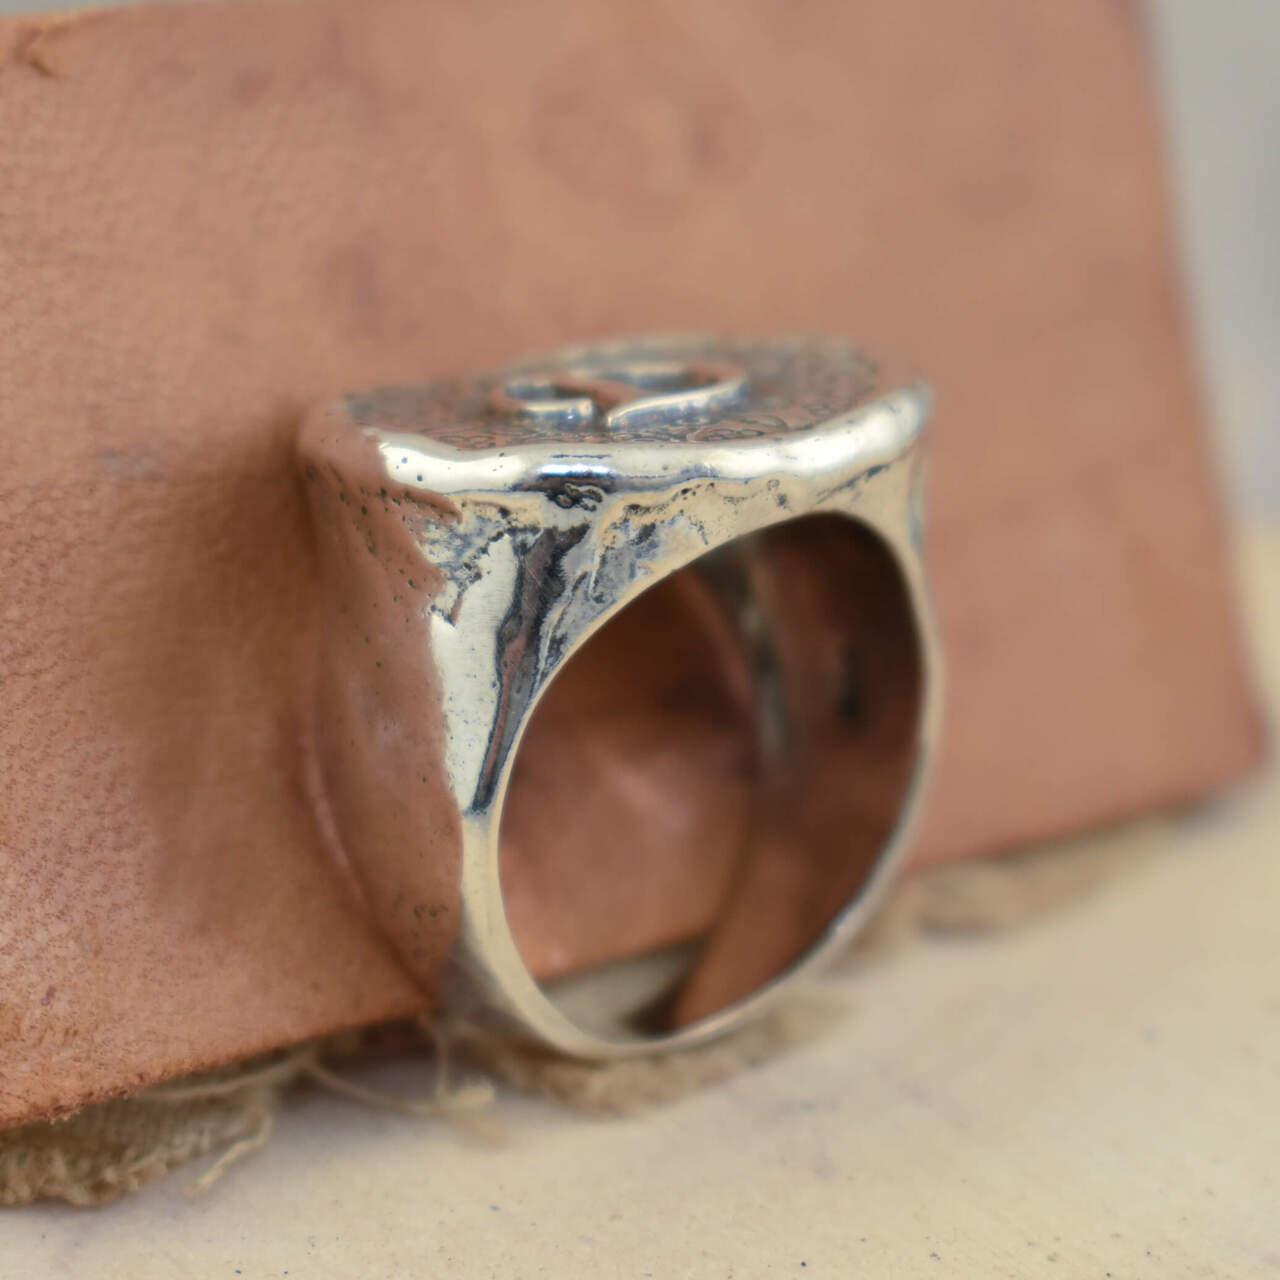 Chunky sterling silver ring with personalization